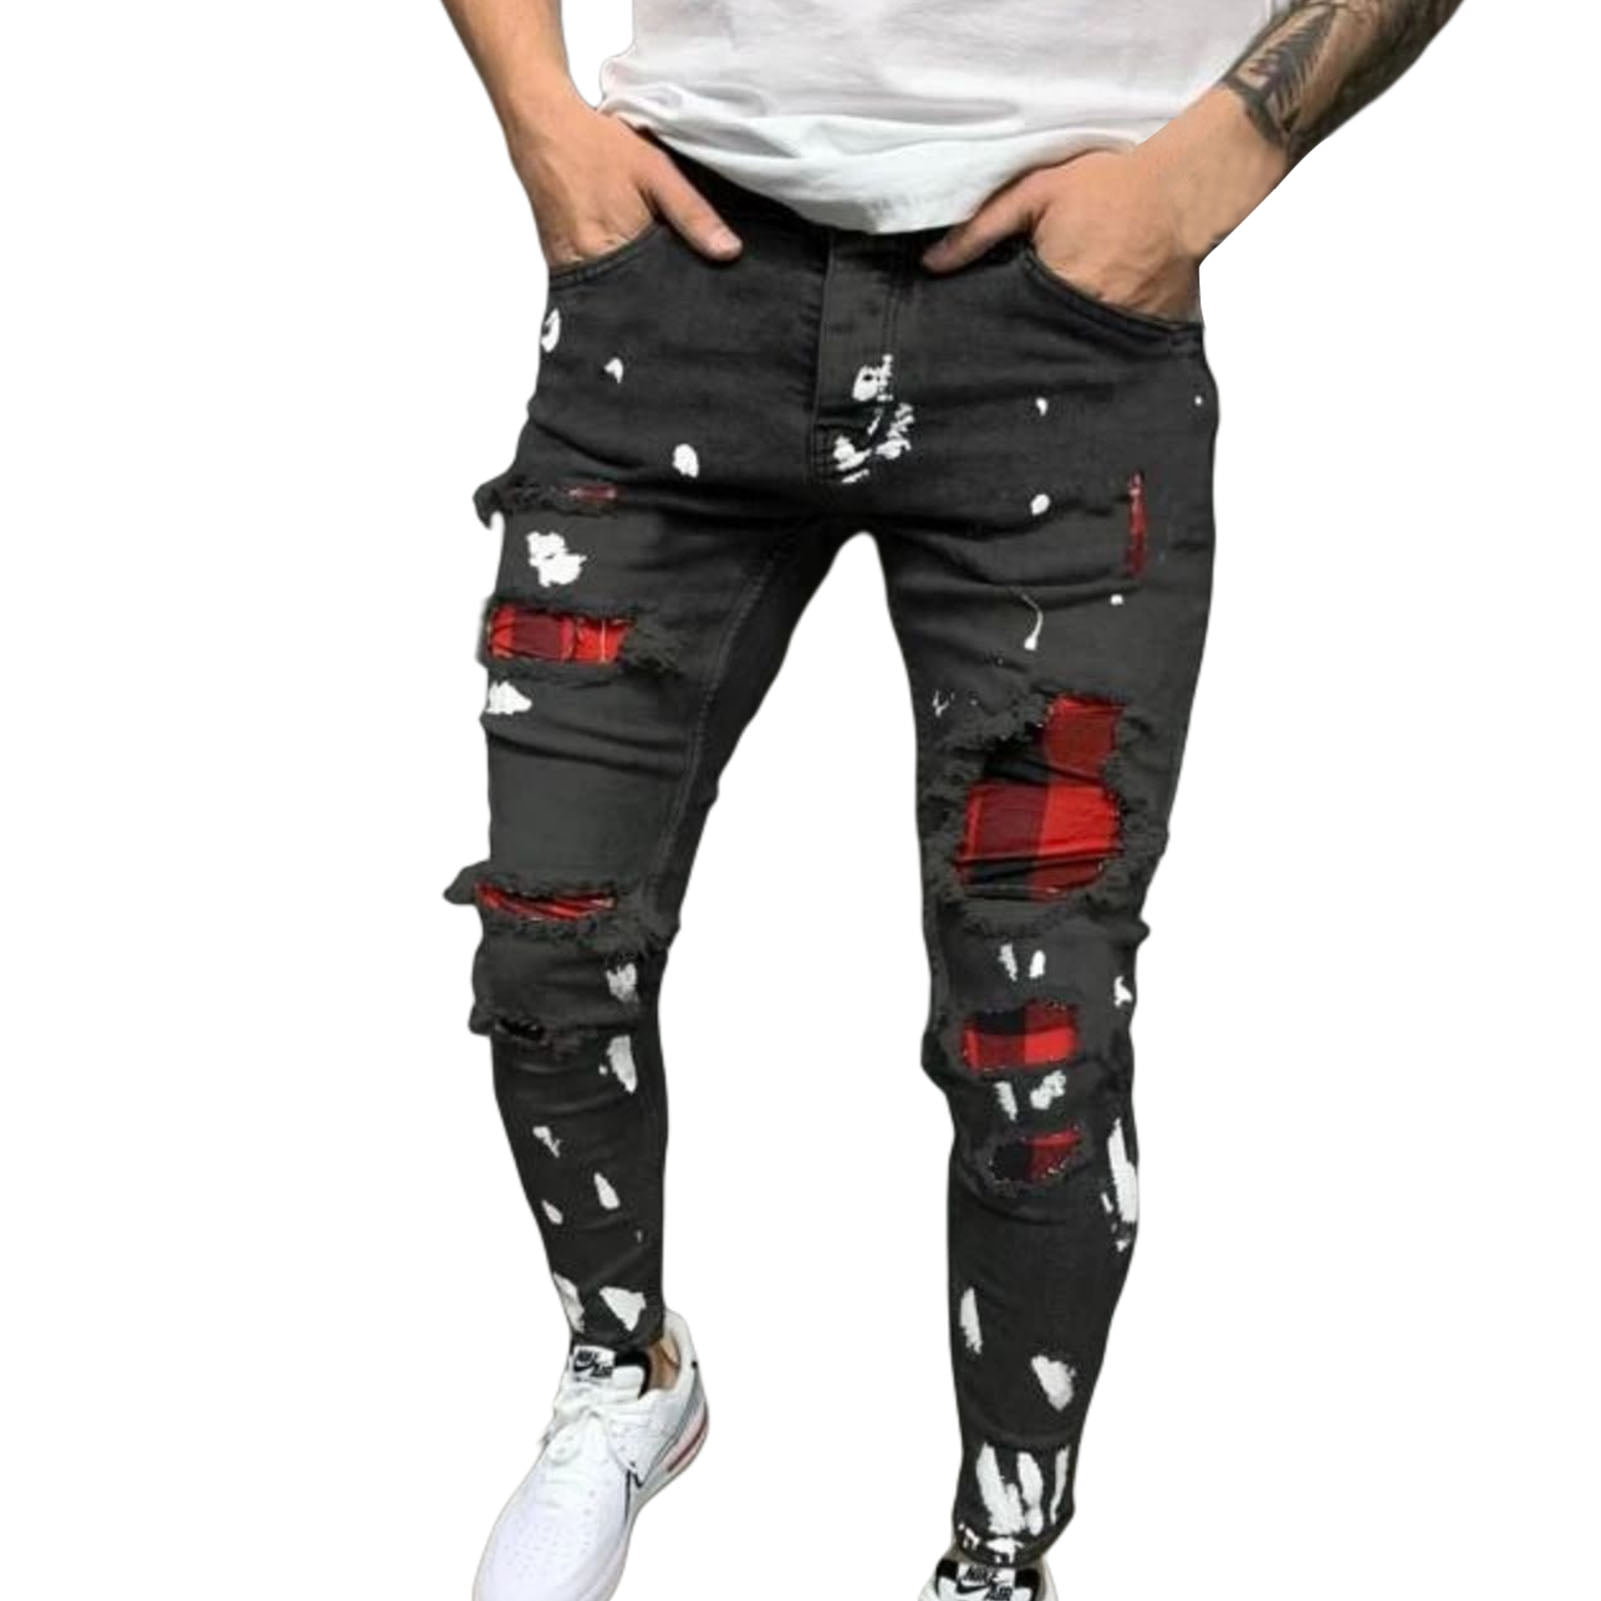 MEGAWHEELS Men?s Ripped Jeans Fashion Distressed Skinny Stretchy